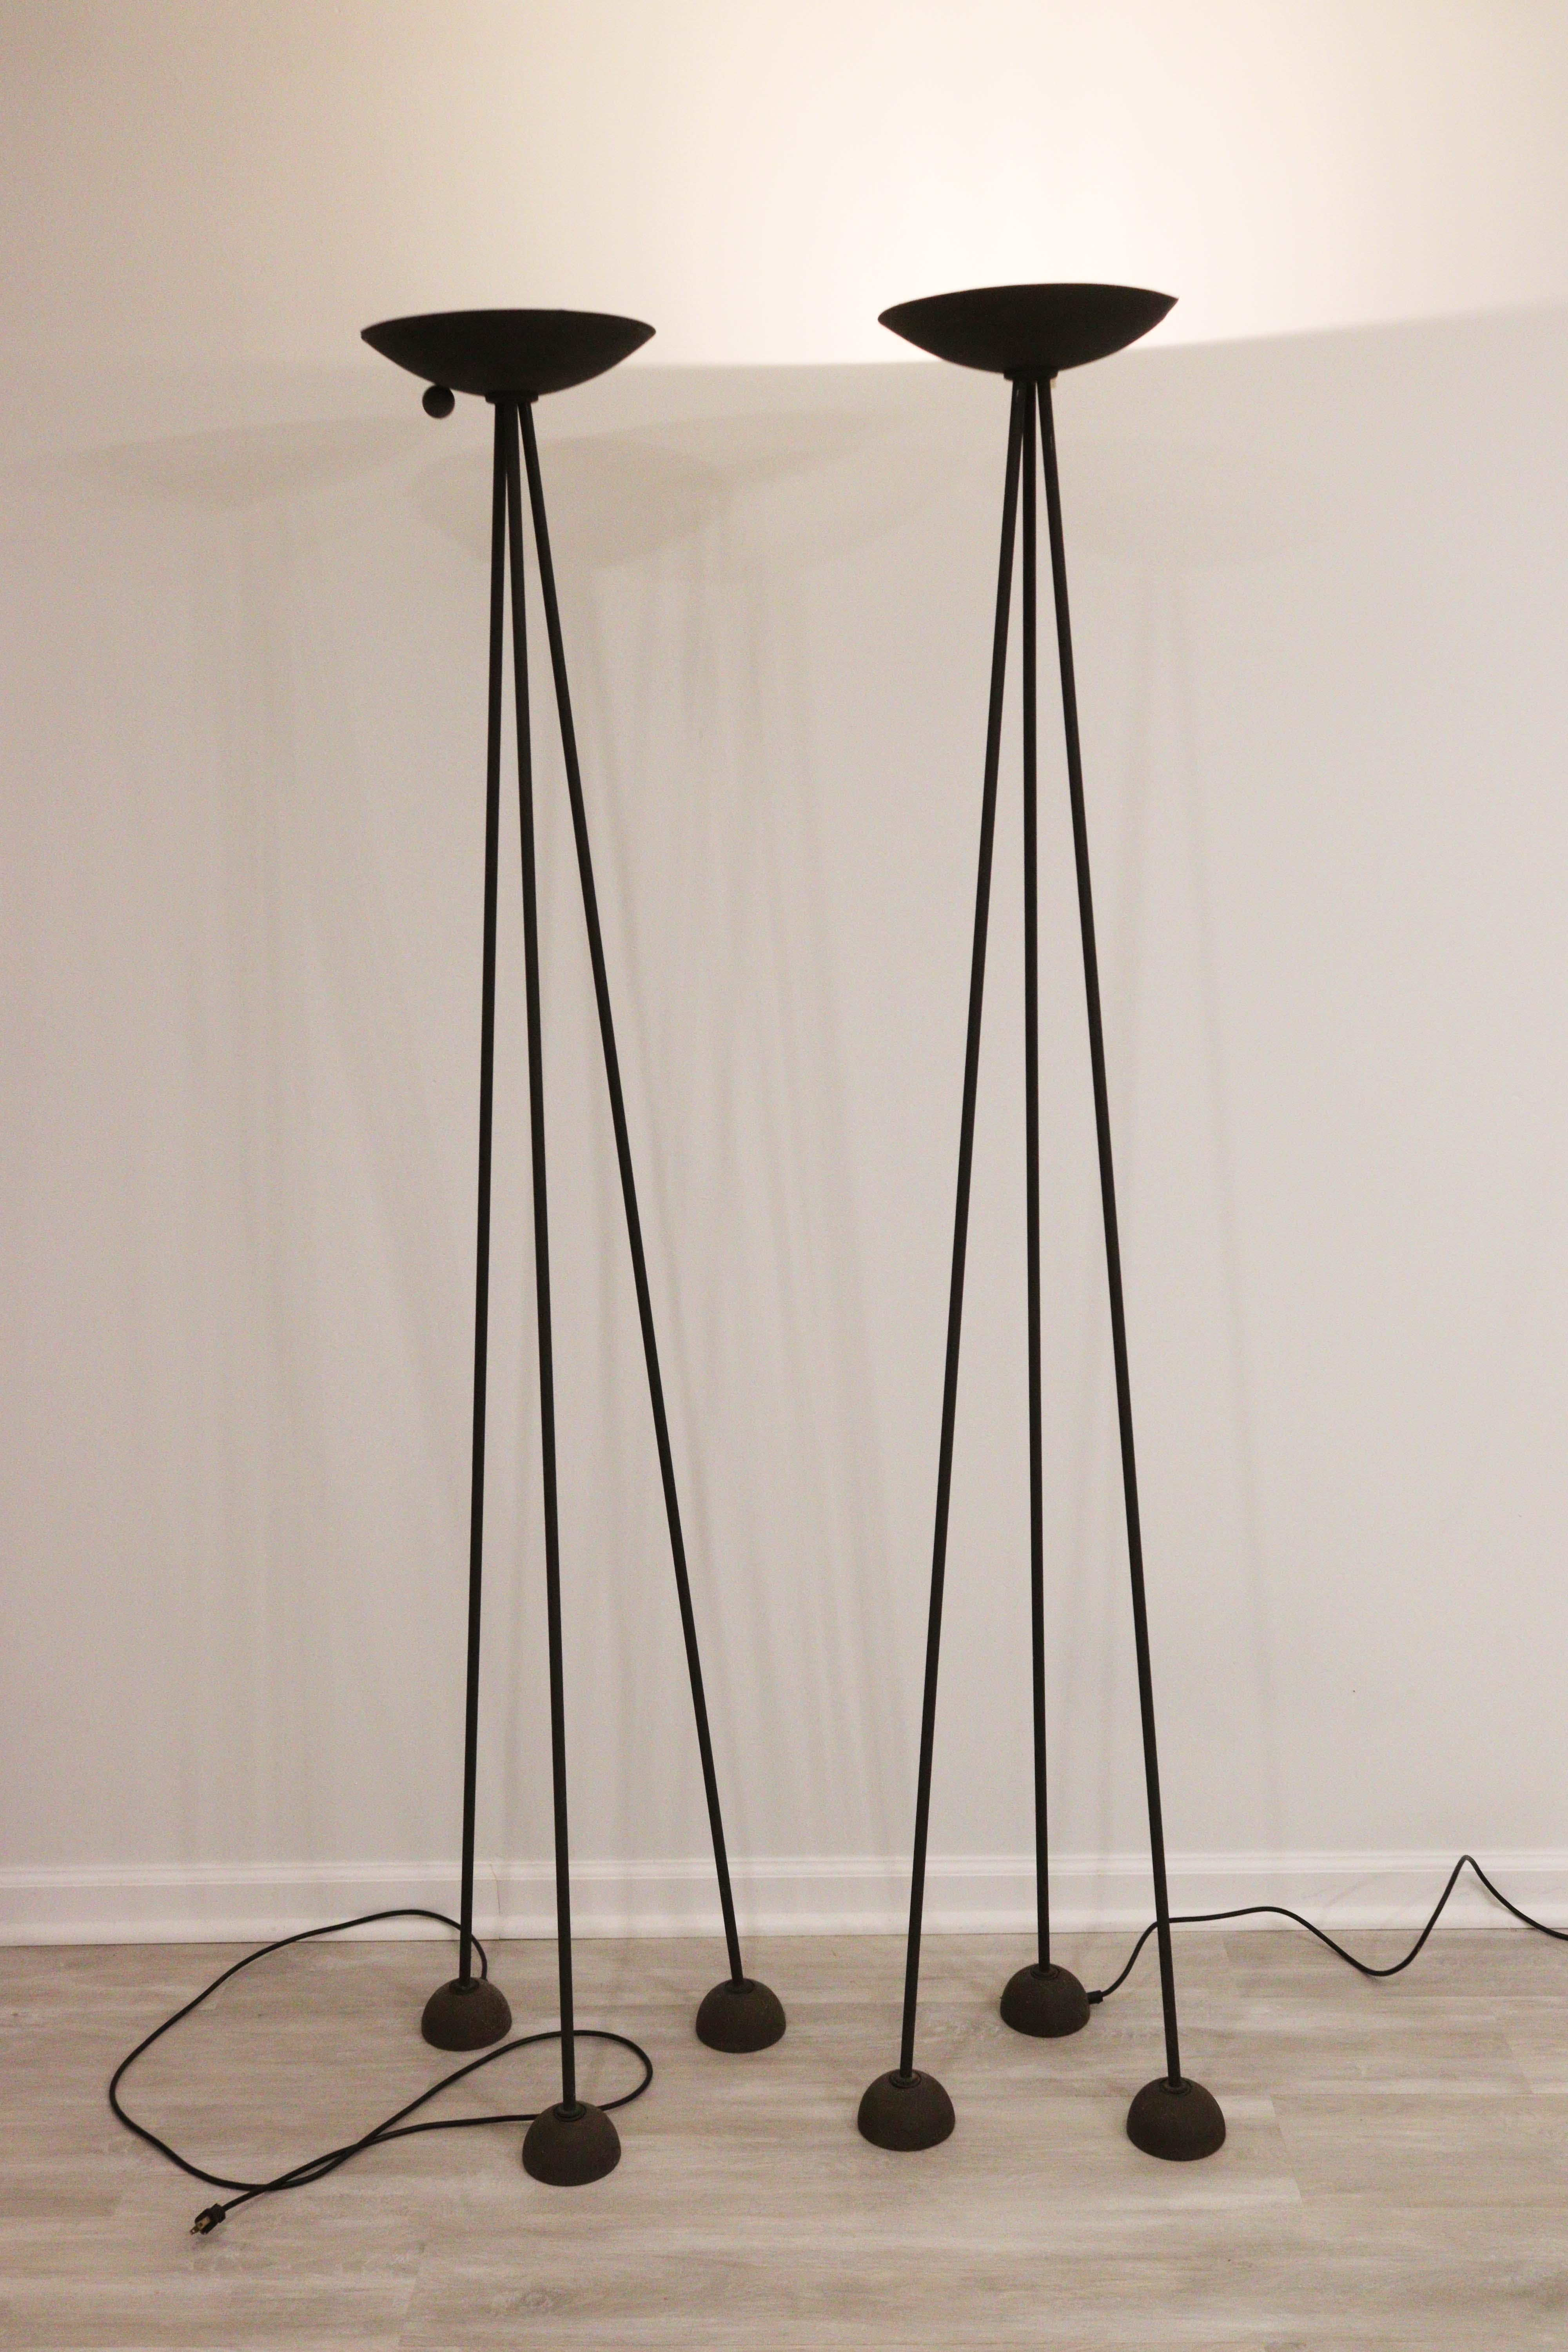 Metal Pair Koch & Lowy Tripod Torchiere Floor Lamps Post Modern Contemporary 1980